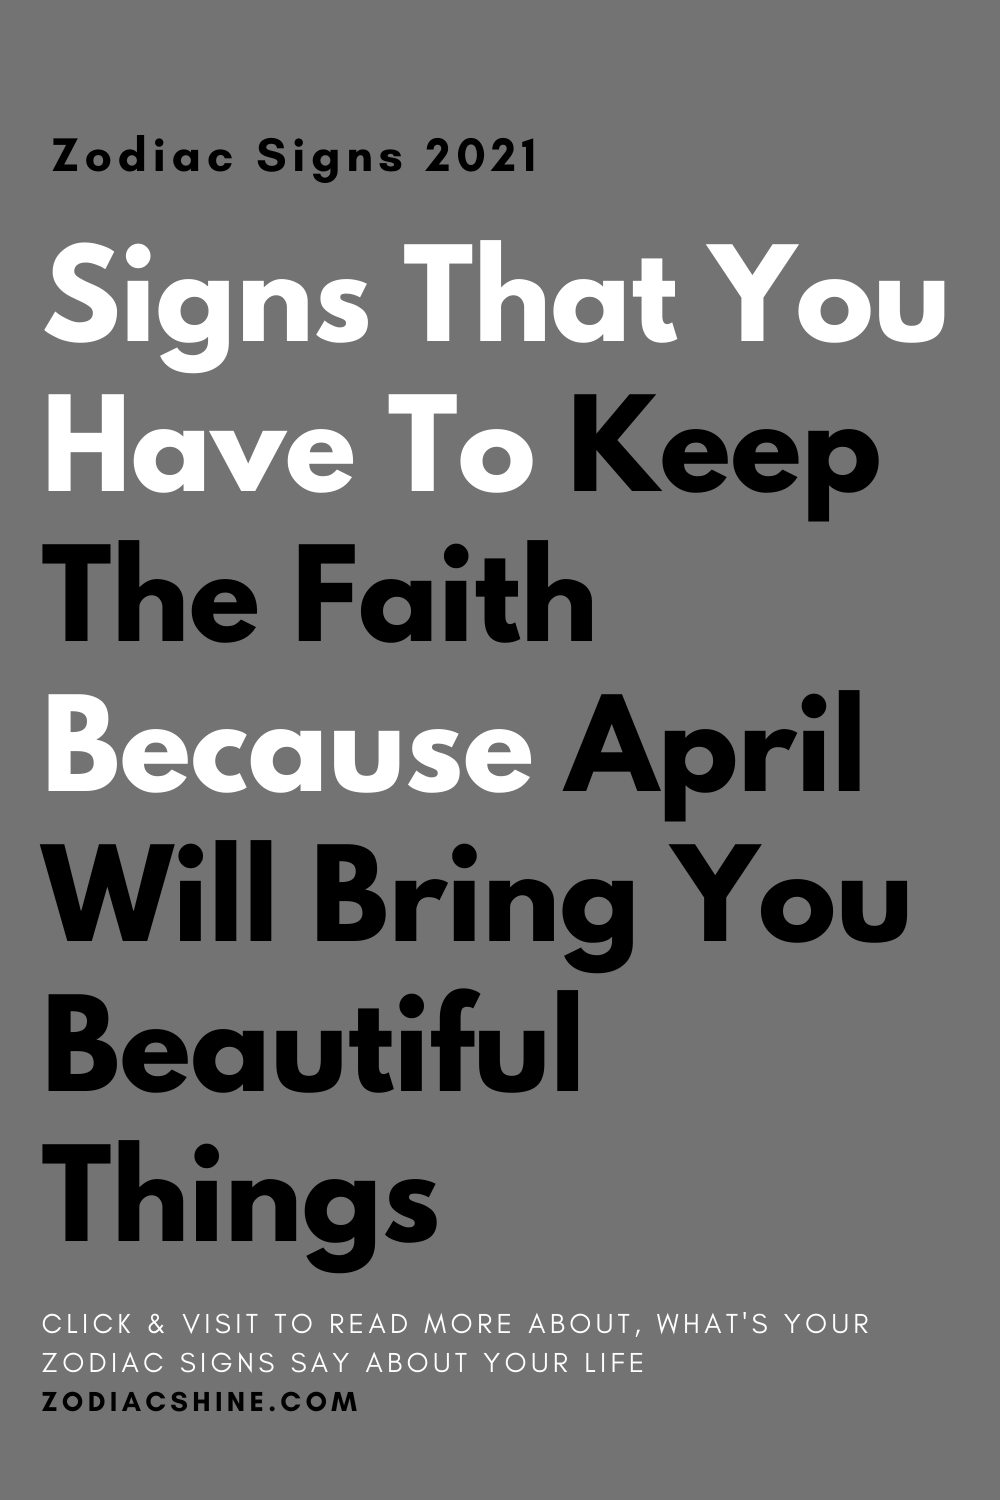 Signs That You Have To Keep The Faith Because April Will Bring You Beautiful Things